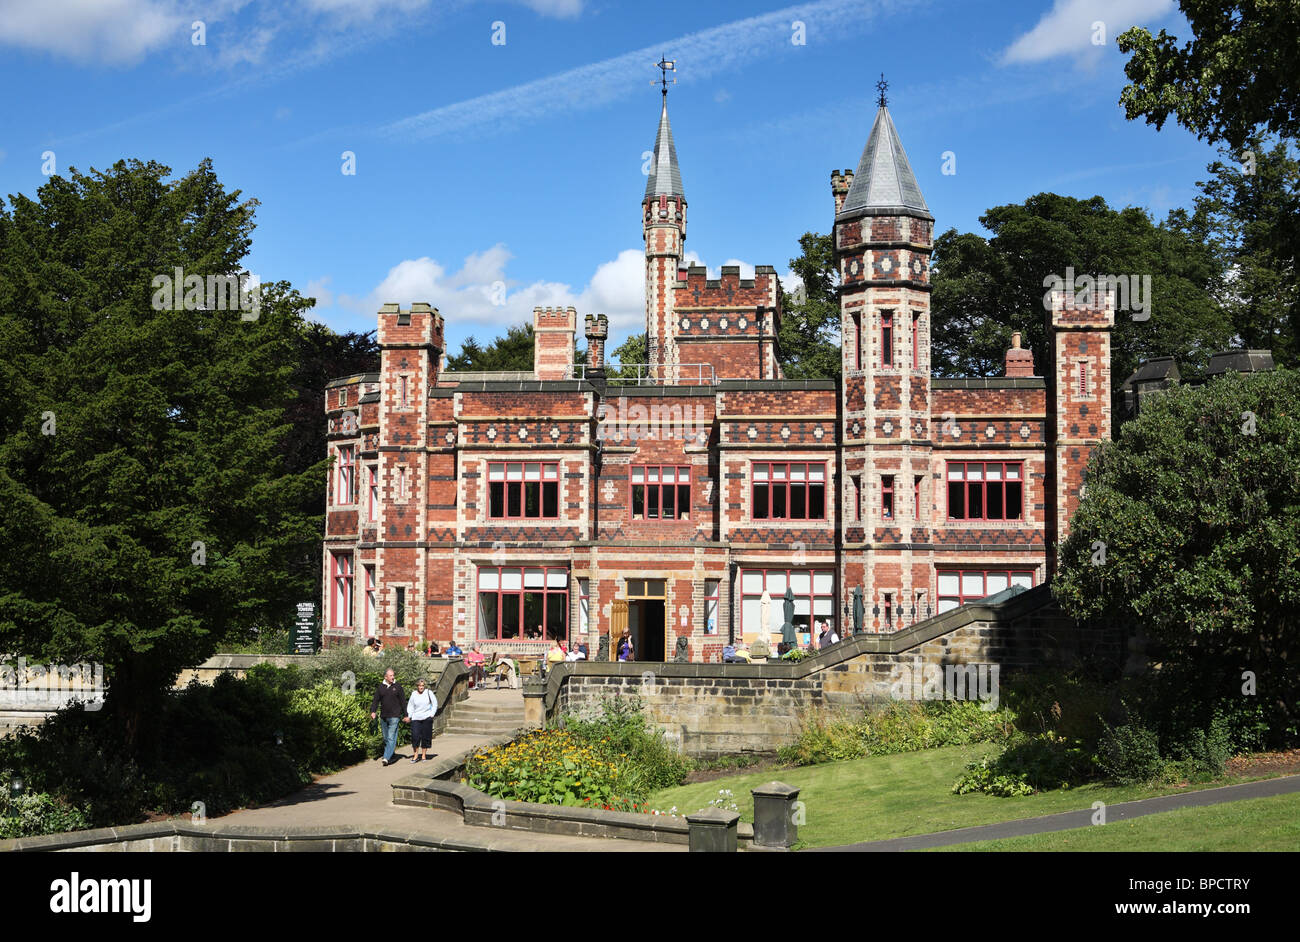 Saltwell Towers, the visitor centre within Saltwell Park in Gateshead, Tyne and Wear, England, UK. Stock Photo